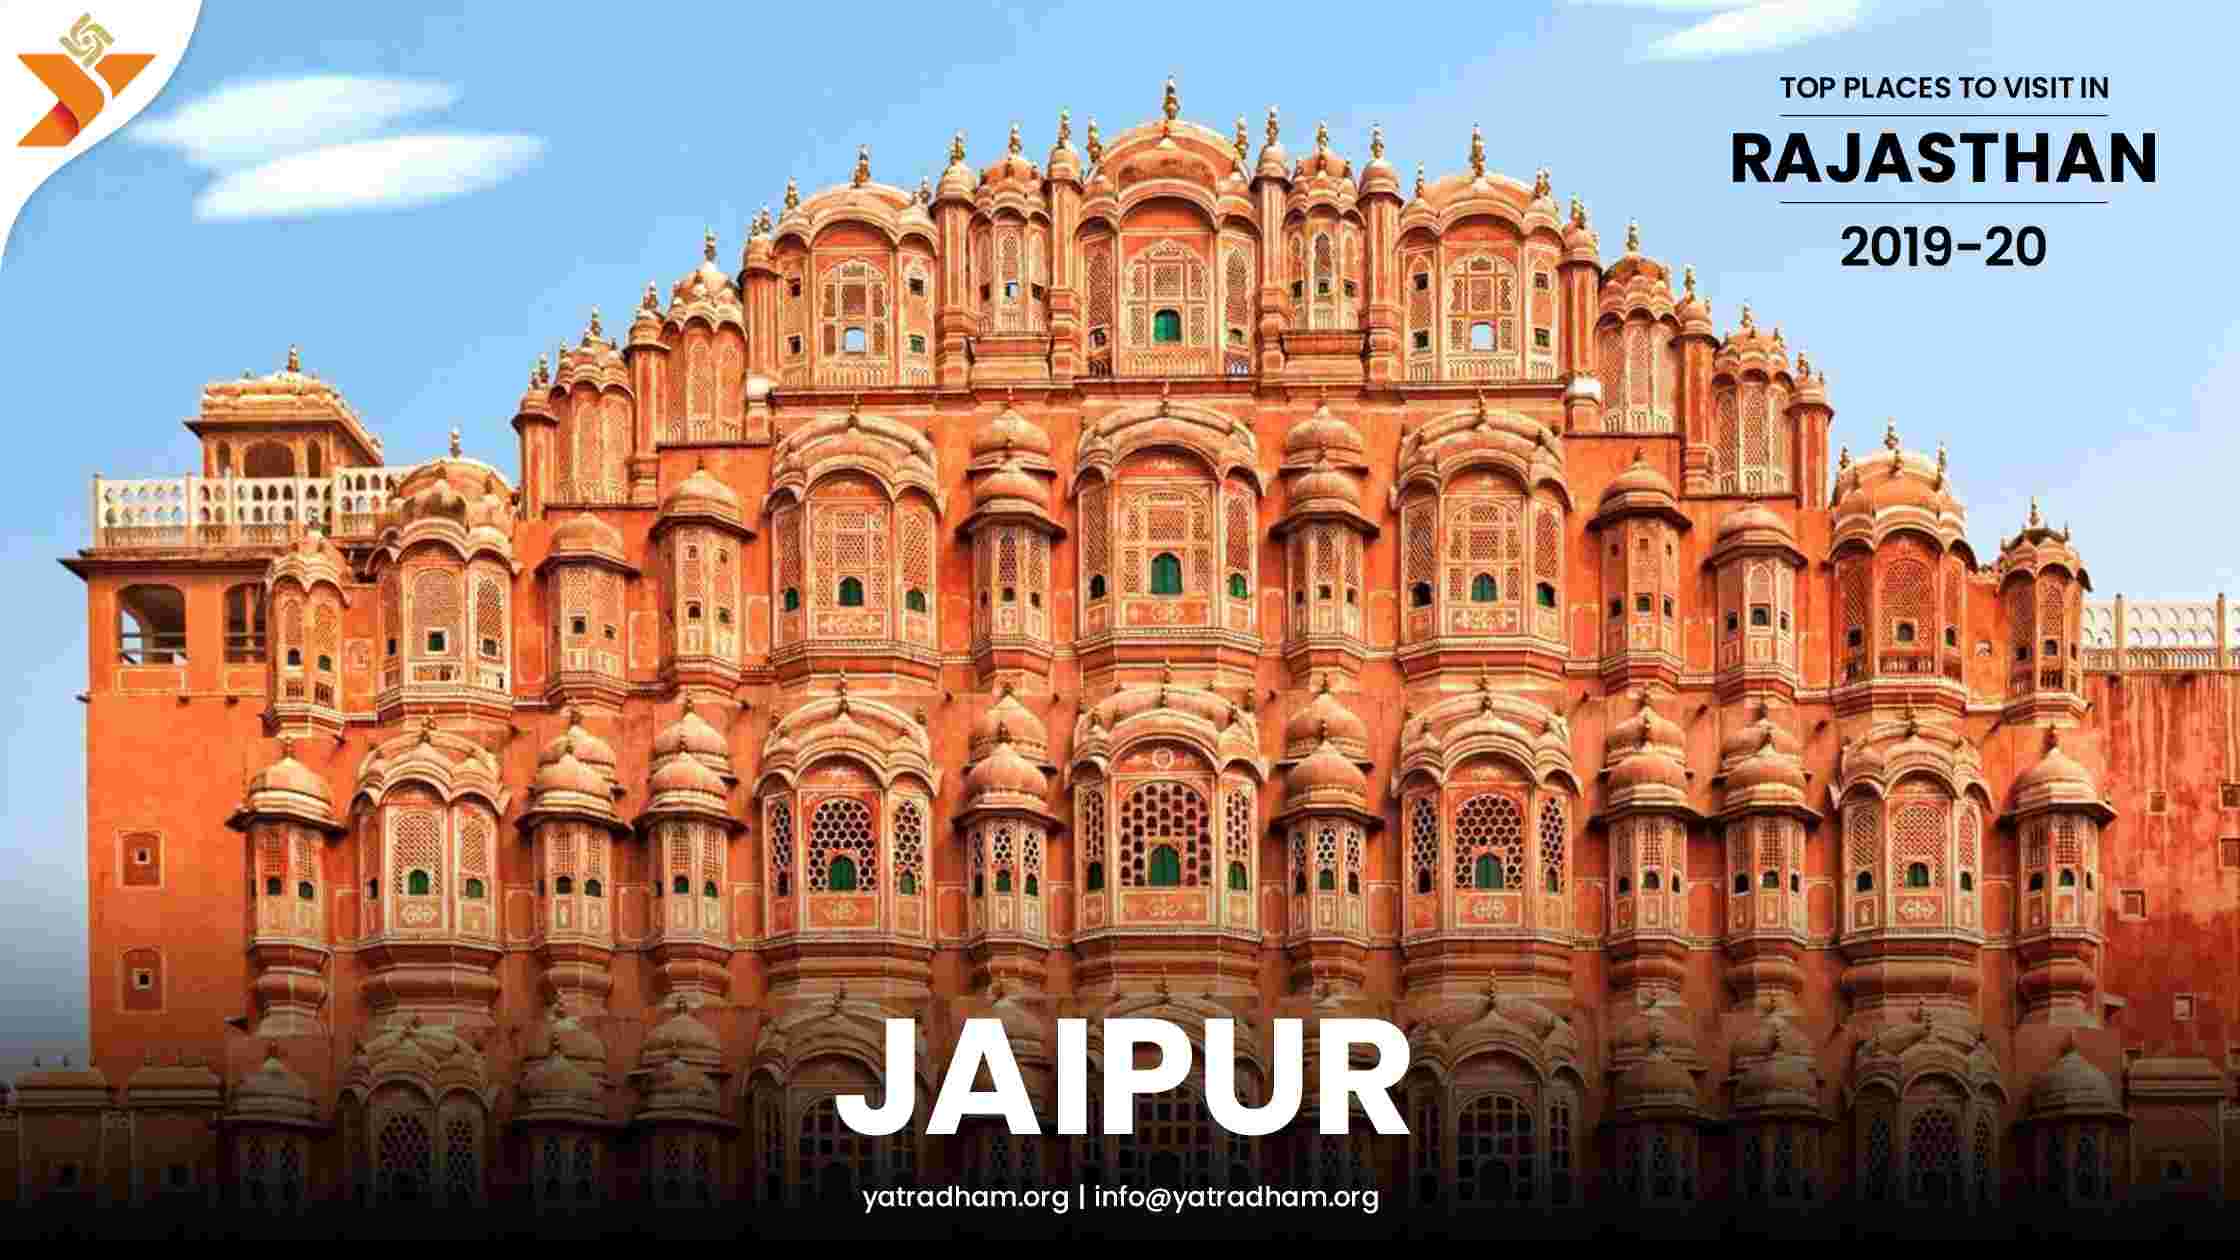 Place to visit and sightseeing in Jaipur | Famous Tourist Destination